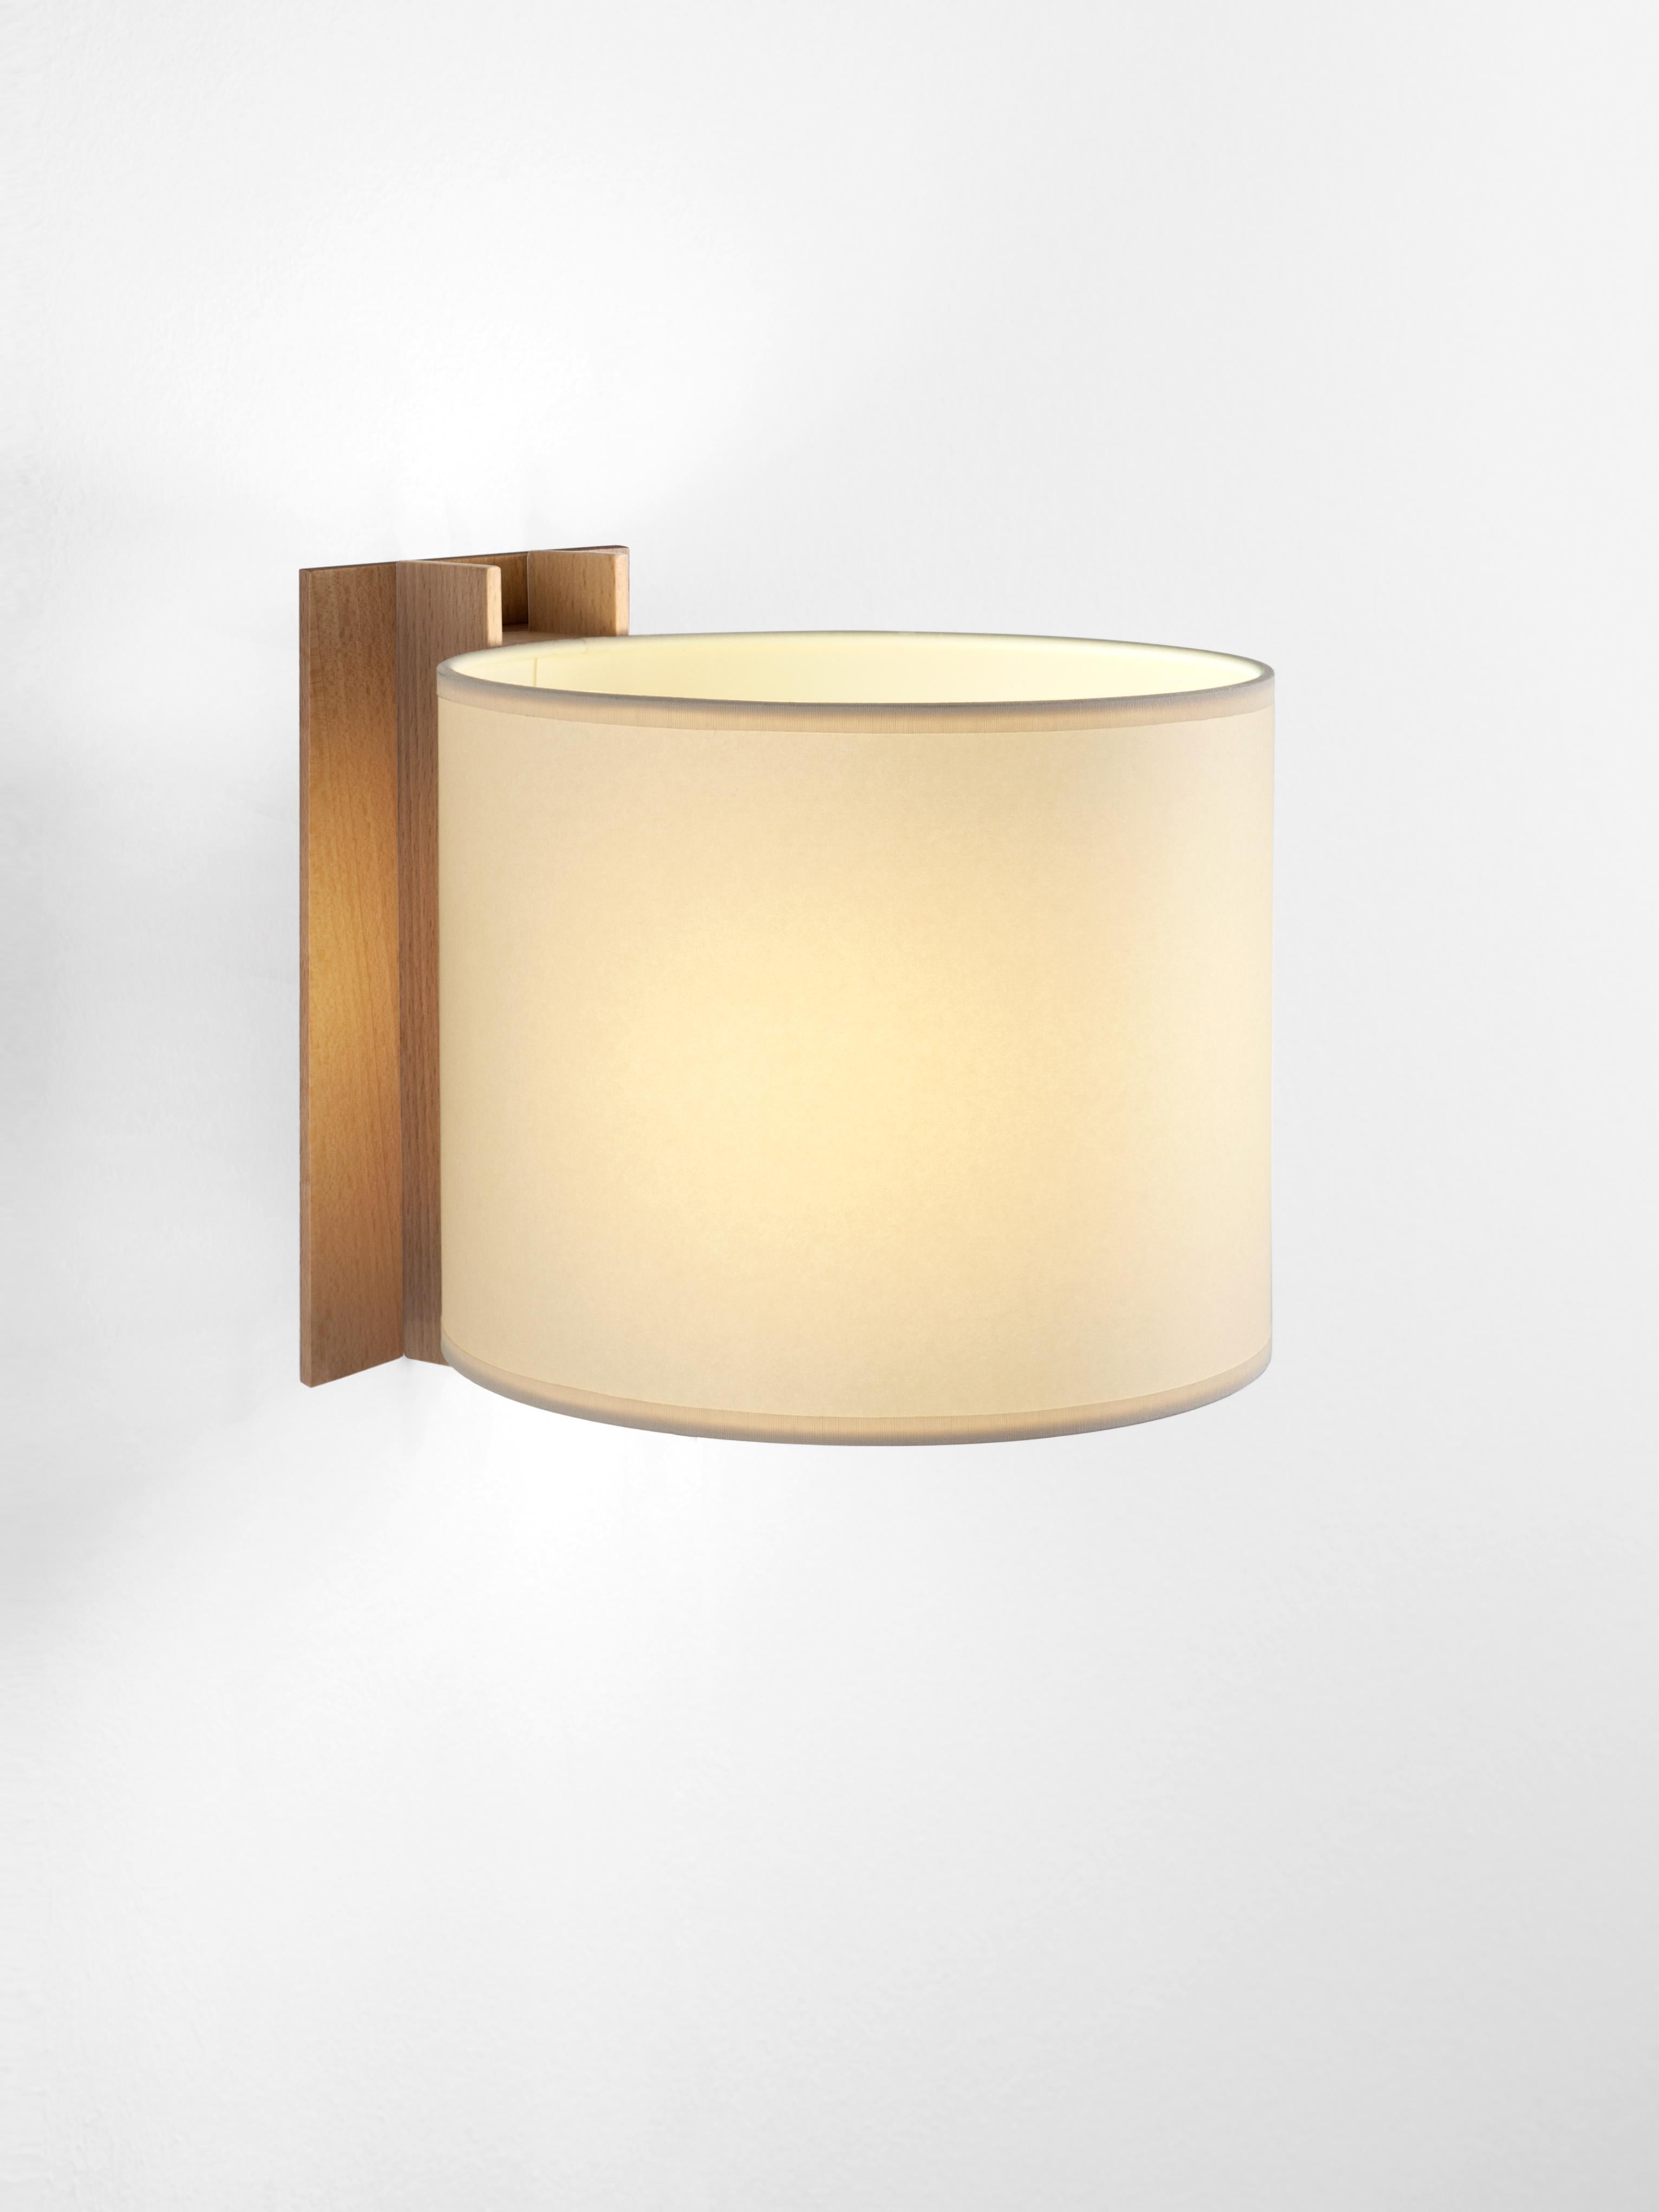 Beige and Beech TMM Corto wall lamp by Miguel Milá
Dimensions: D 20 x W 23 x H 20 cm
Materials: Metal, beech wood, parchment lampshade.
Direct wall.
Available in beech or walnut and in white or beige lampshade.
Available with plug or direct